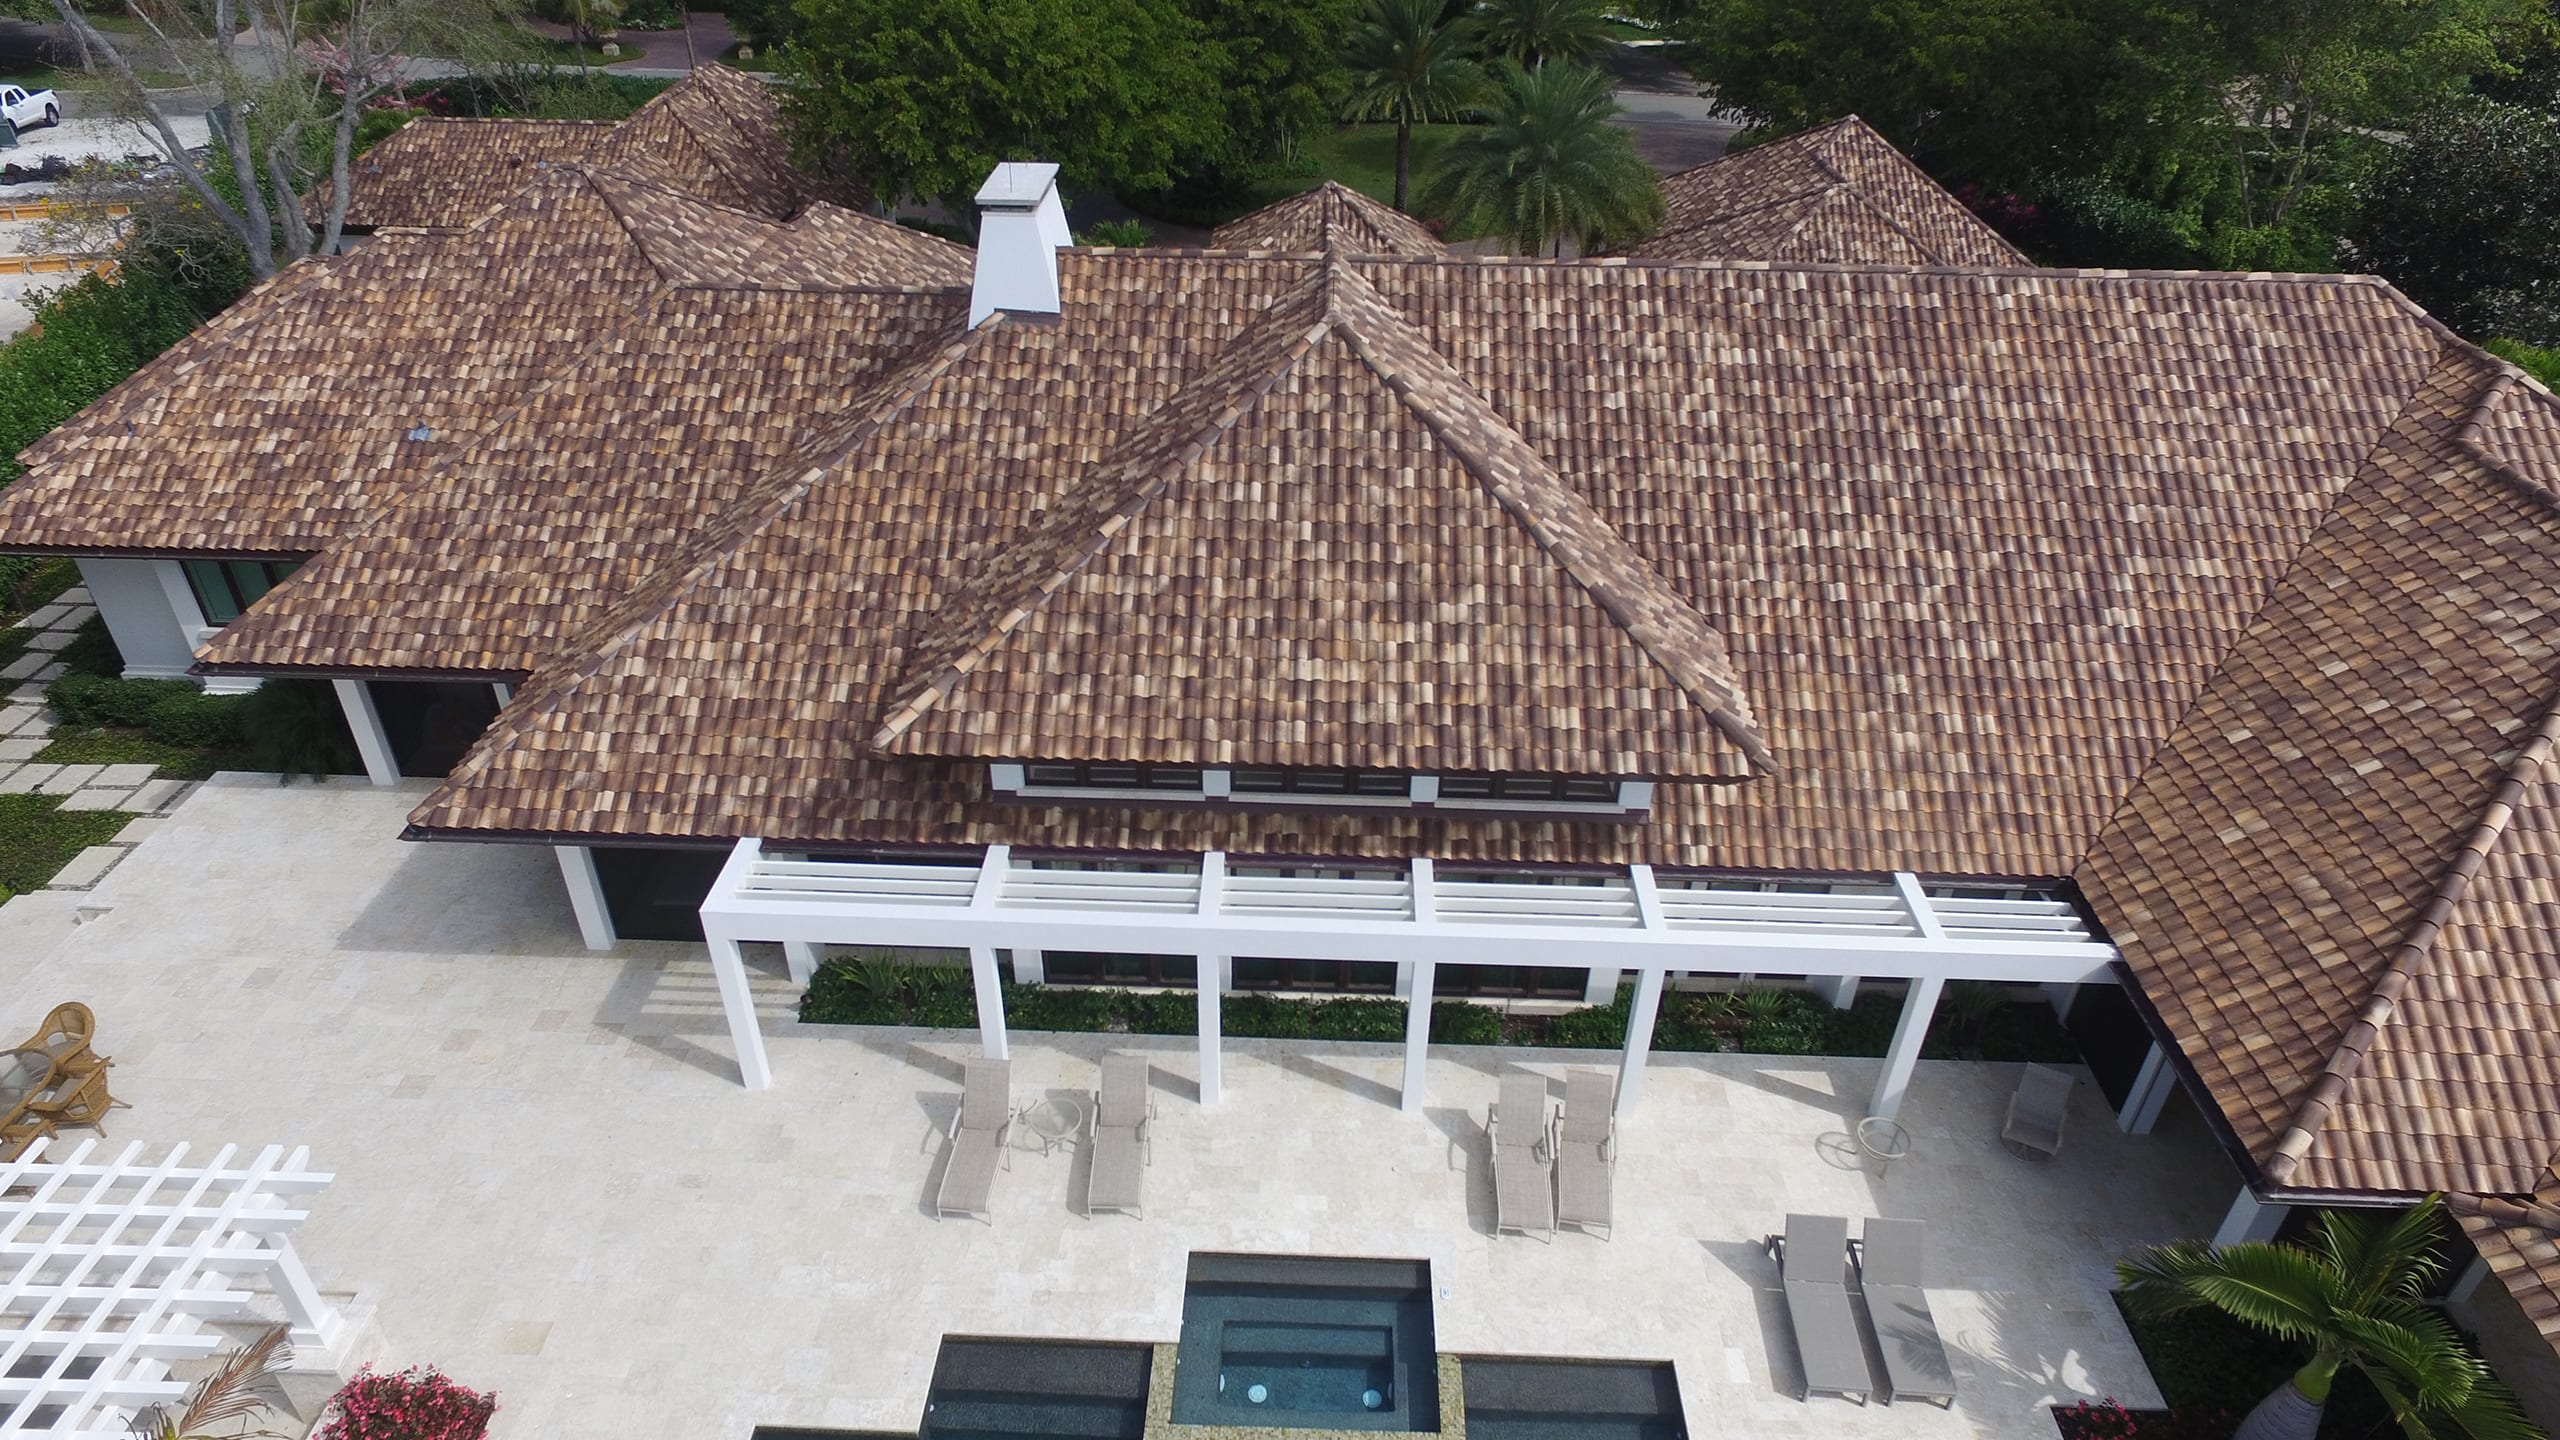 Private Residence in Naples Florida Featuring Ludowici Spanish Clay Roof Tile